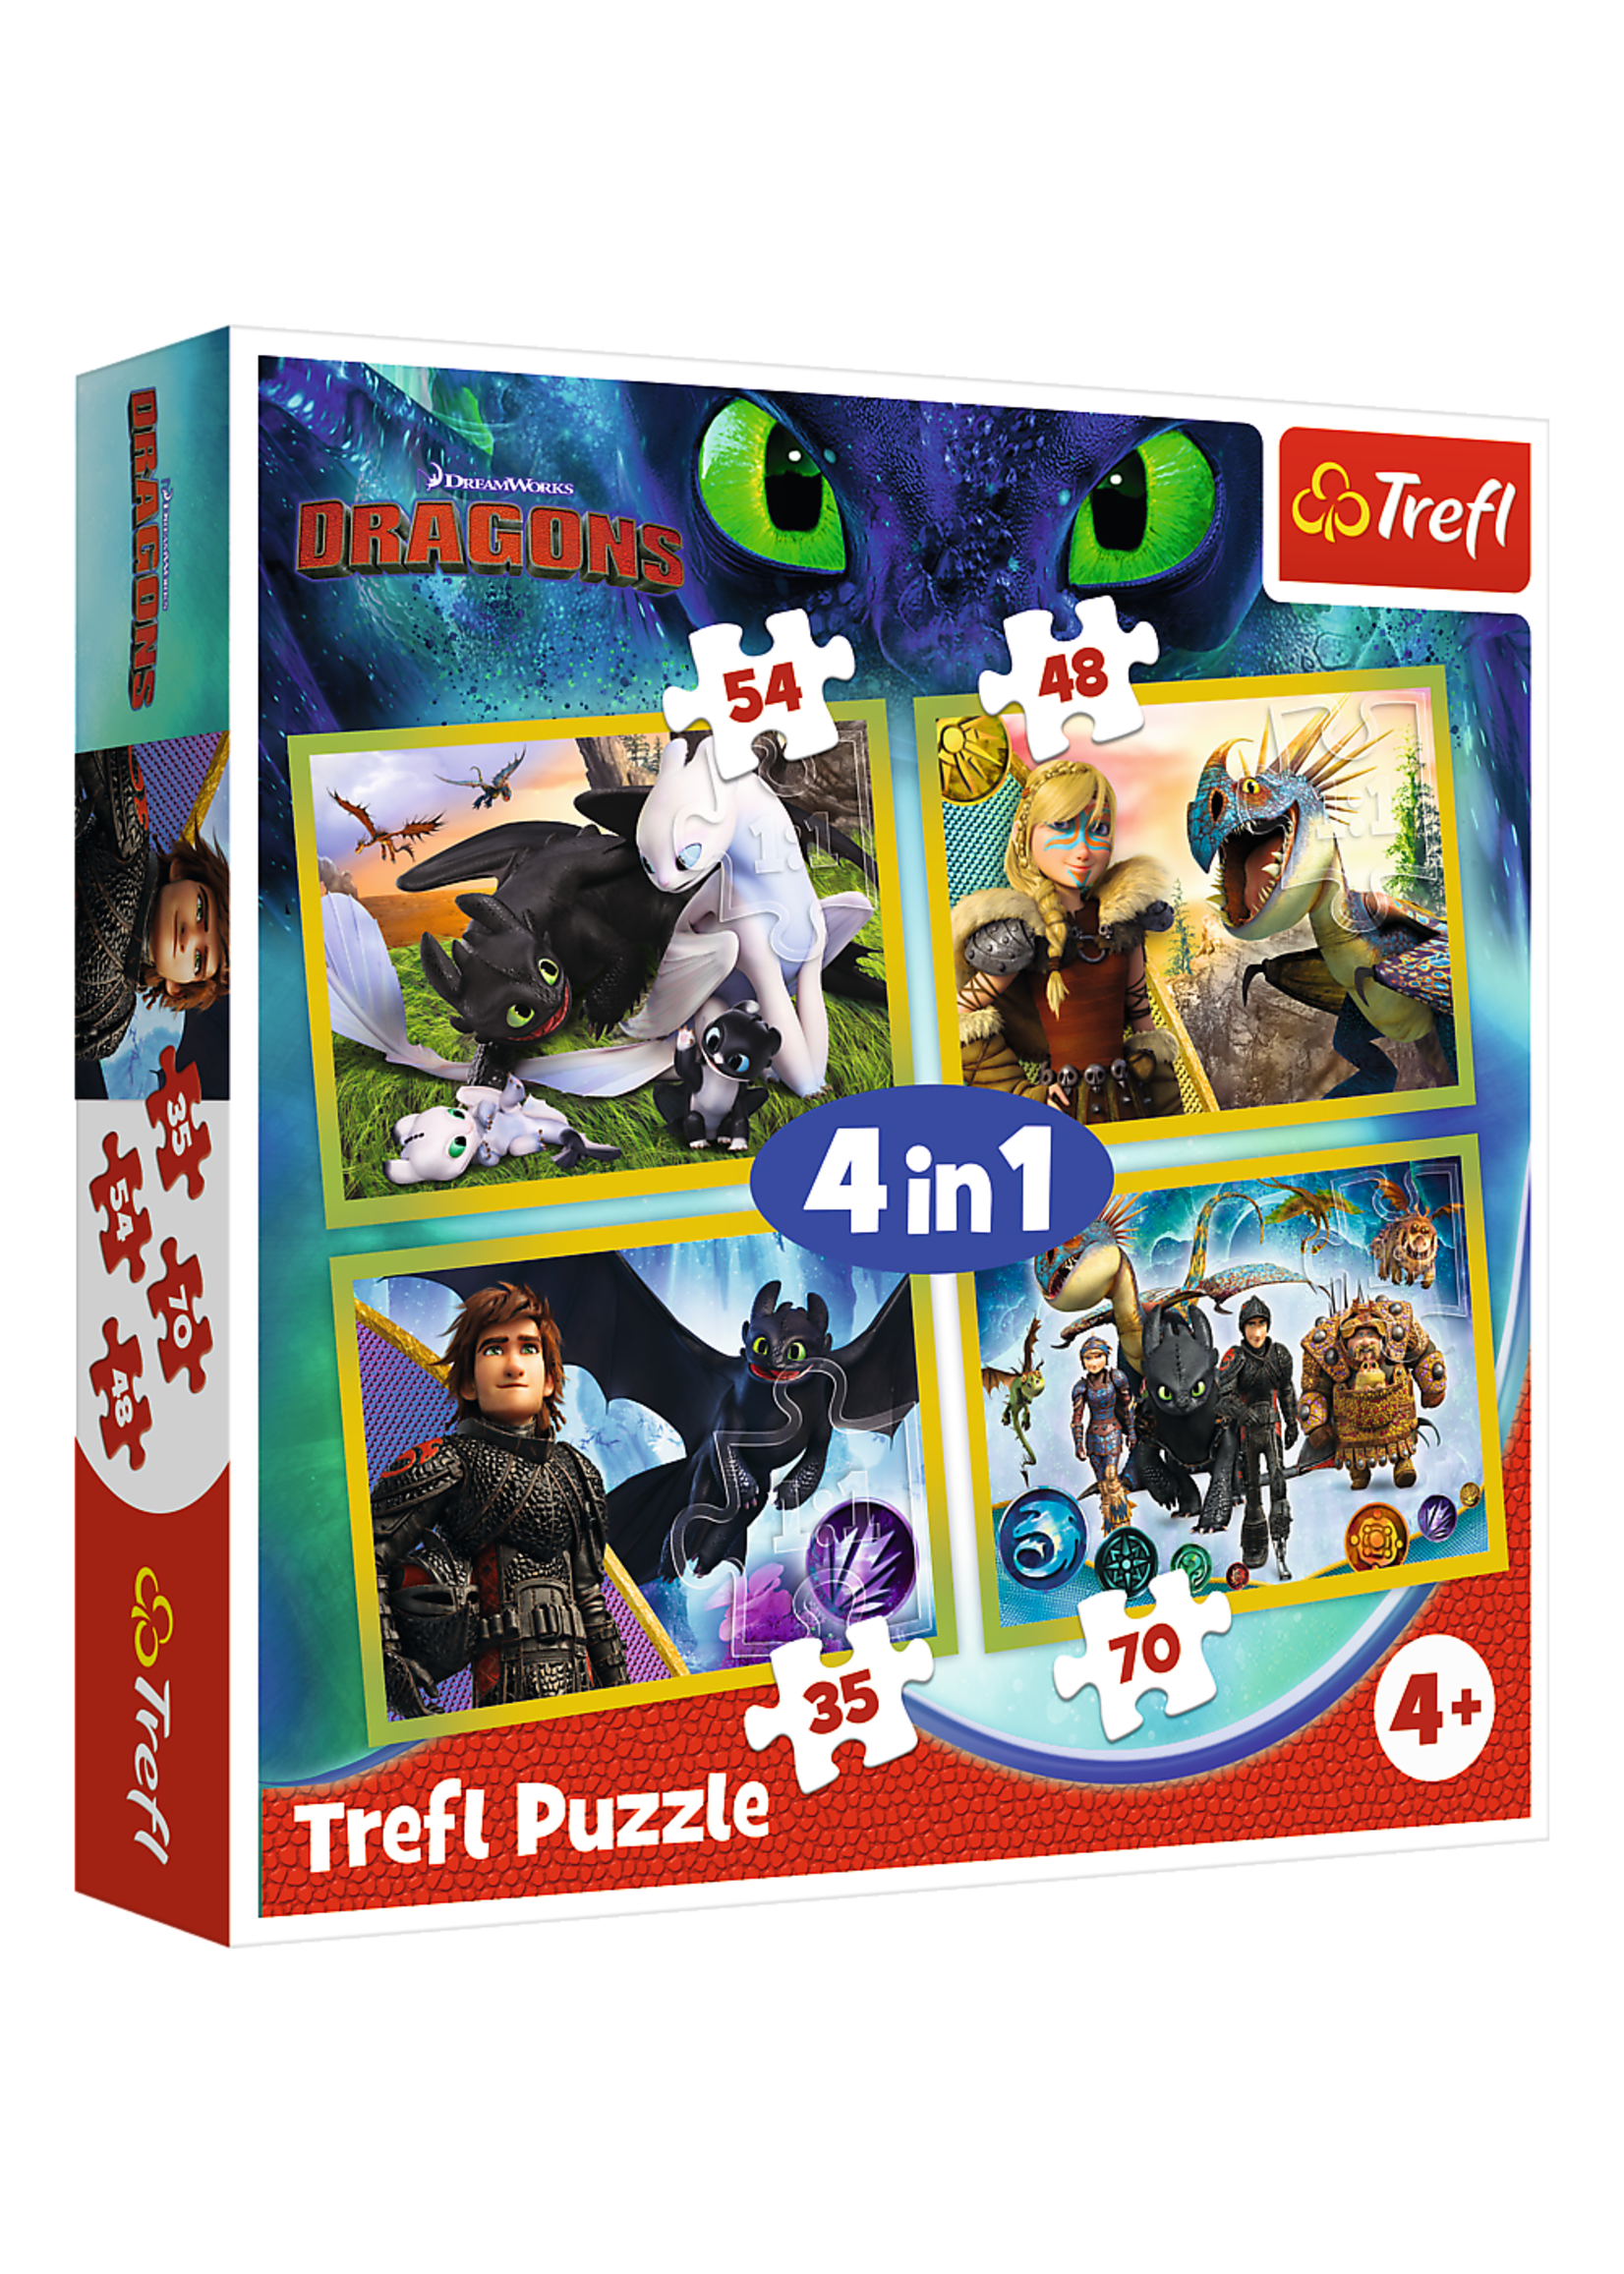 DreamWorks Dragons 4 in 1 puzzle from DreamWorks